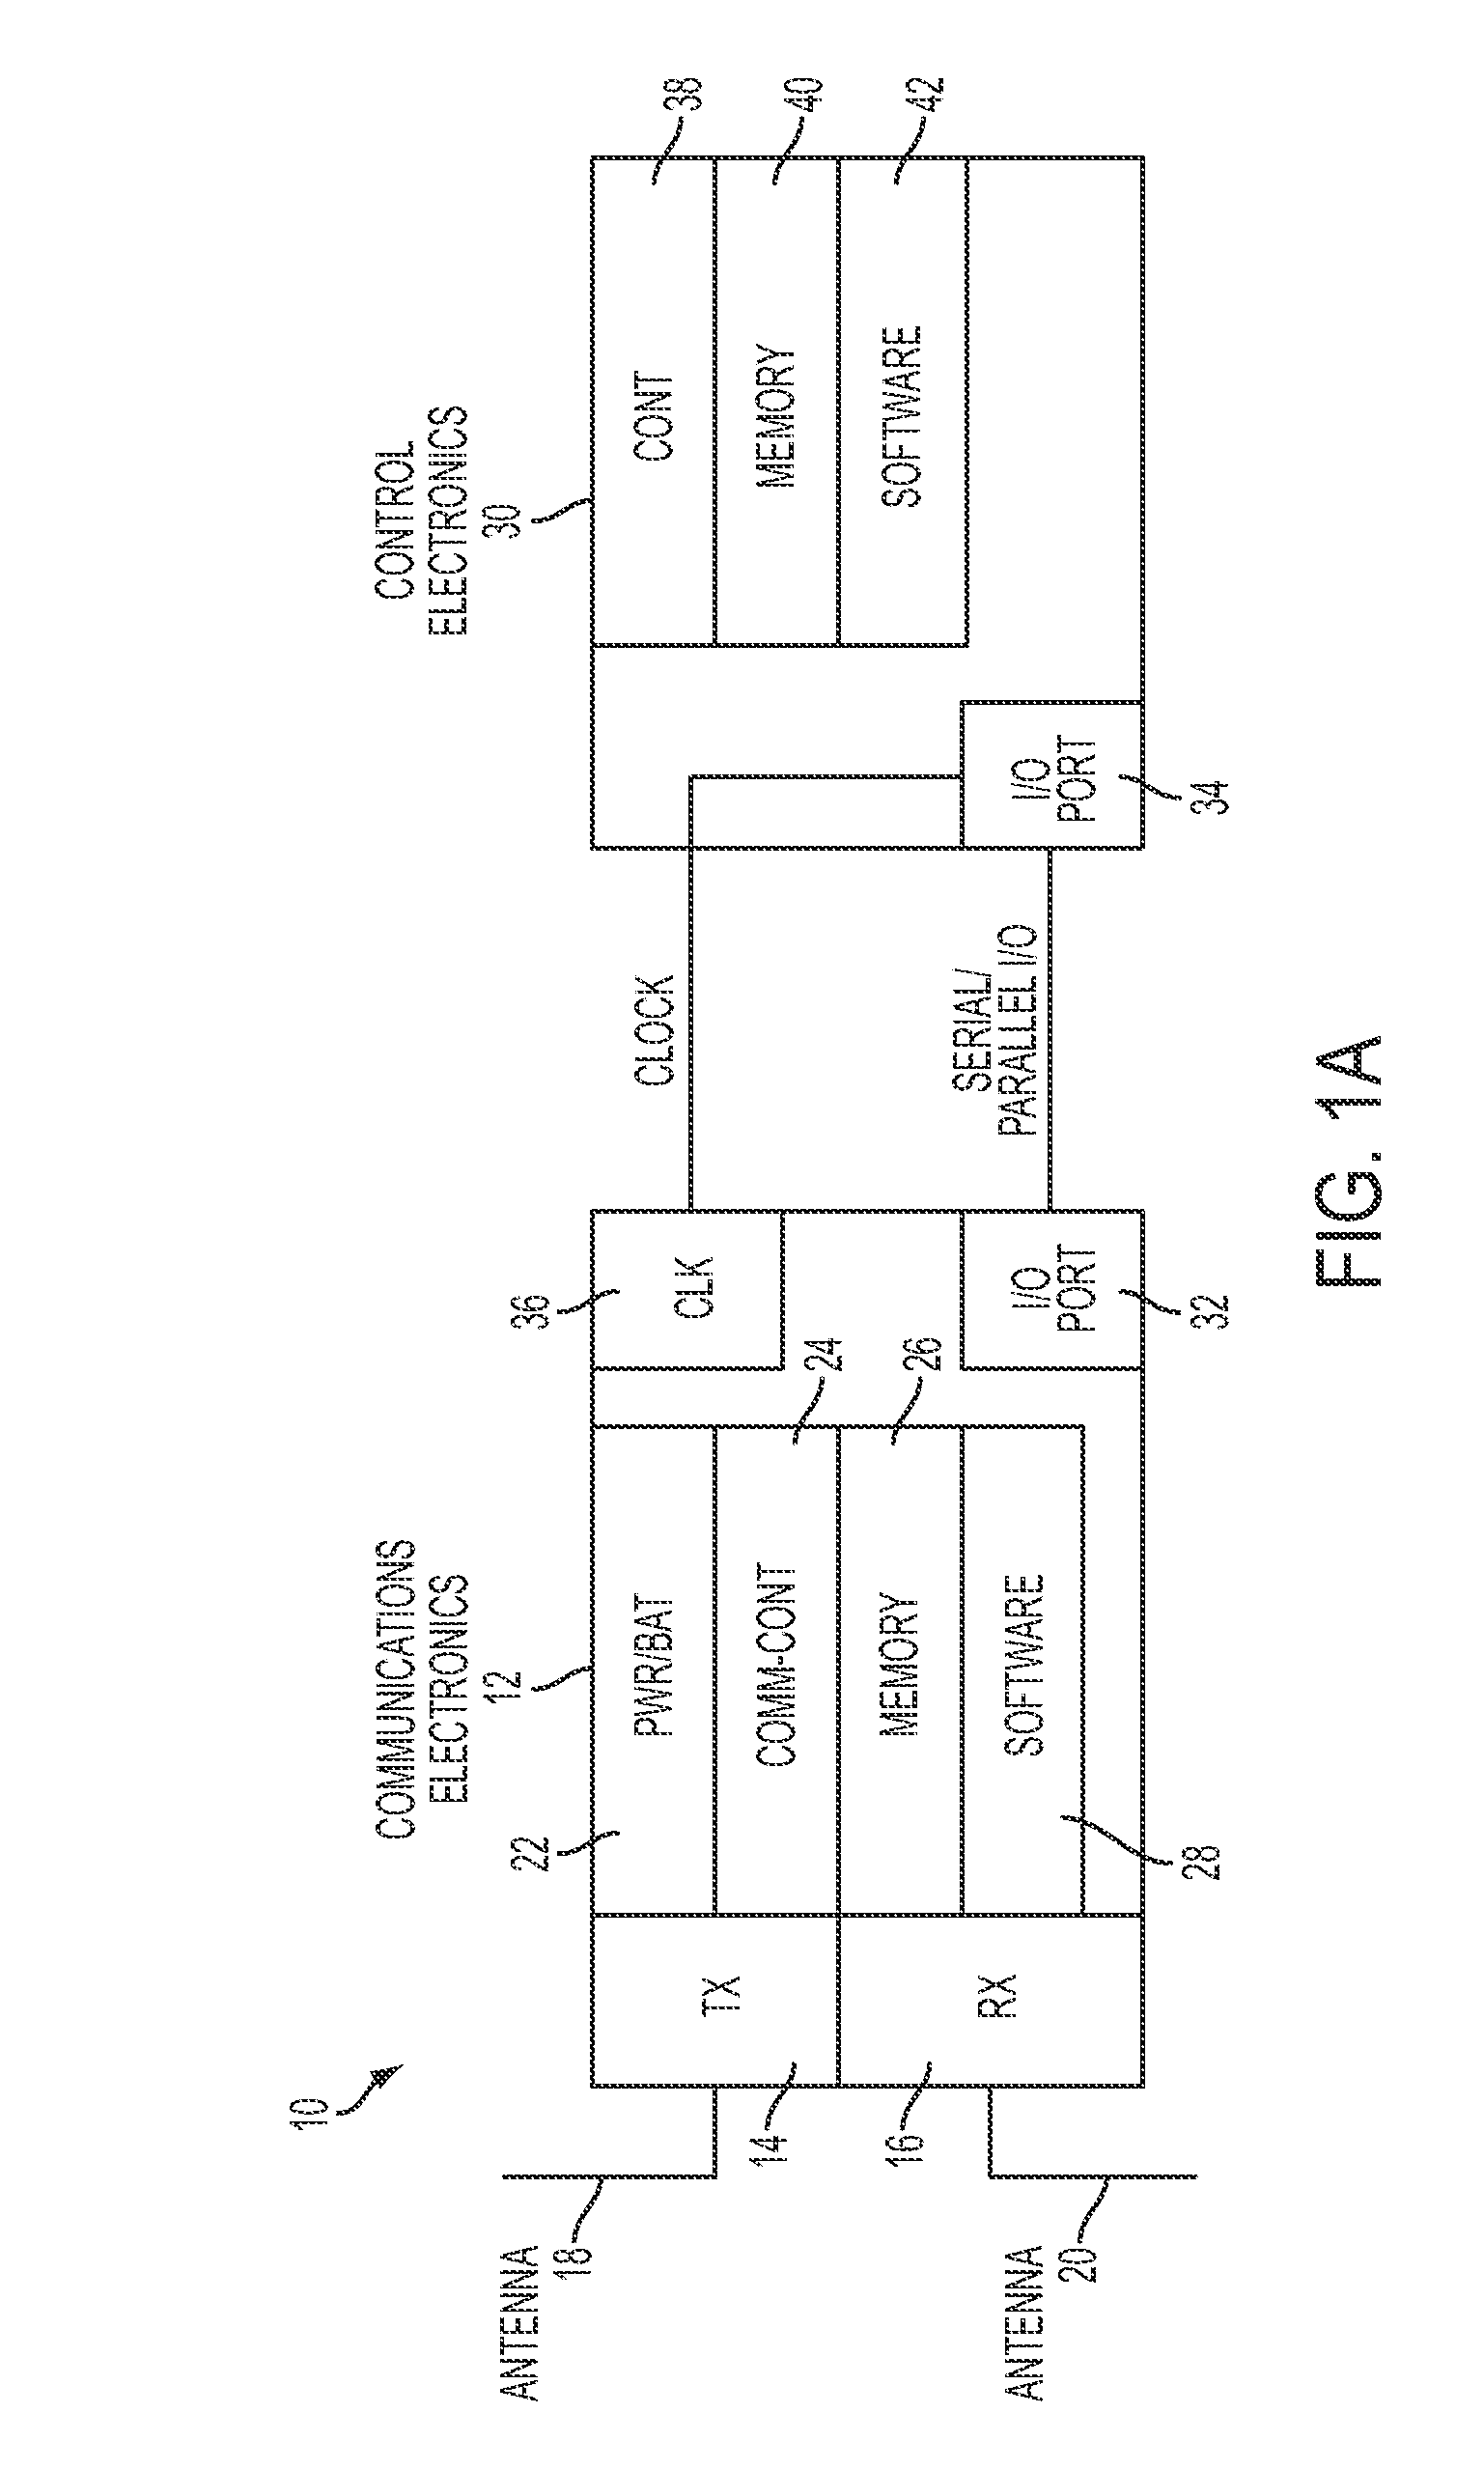 Remote transaction system utilizing compact antenna assembly